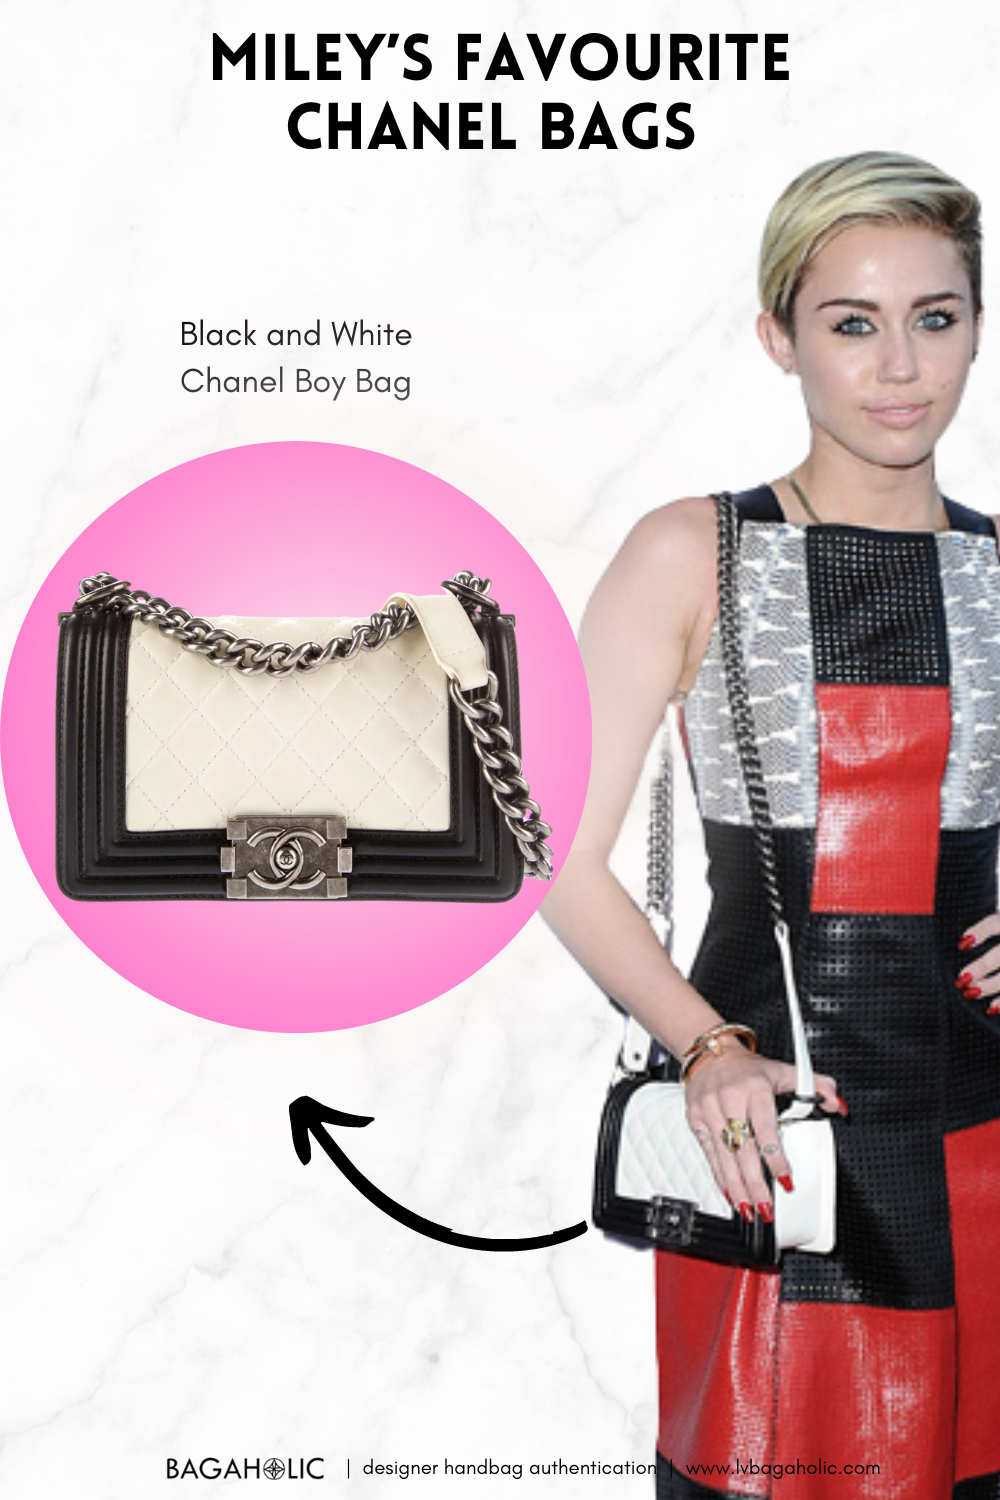 100 Celebs and Their Favorite Chanel Bags beyonce chanel boy bag celebs Part1  miley cyrus chanel bag celebrities designer bags